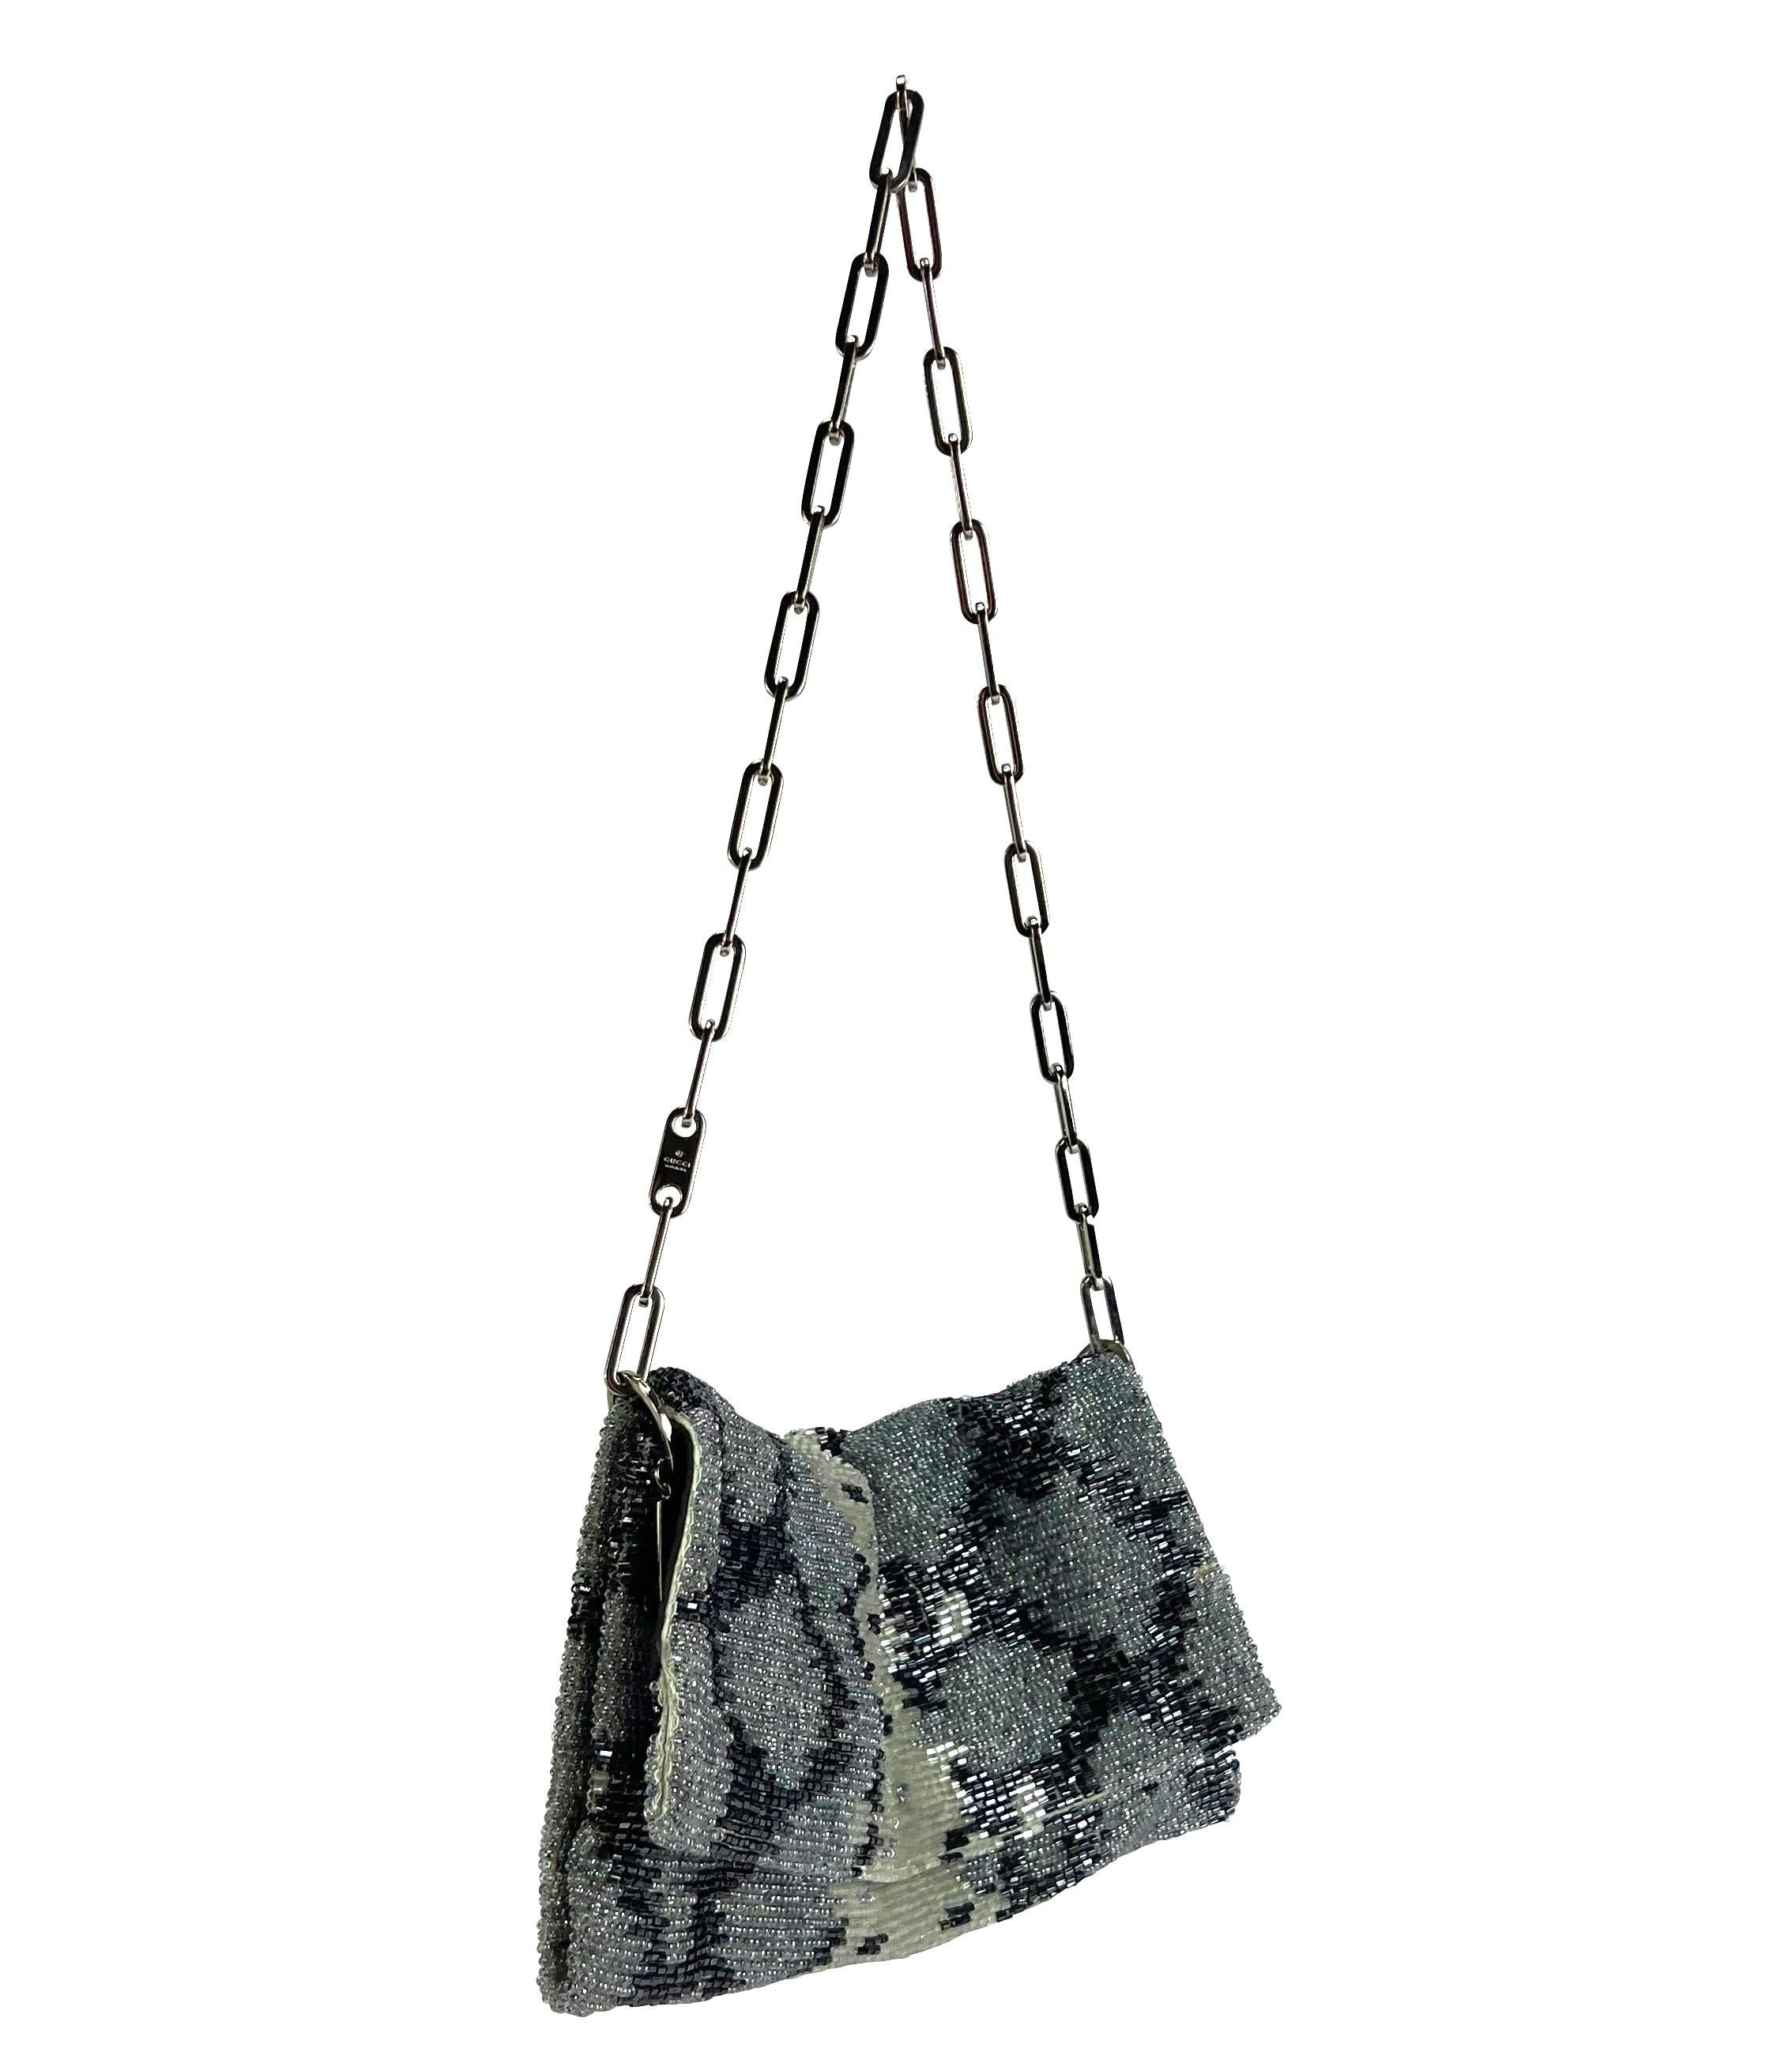 S/S 2000 Gucci by Tom Ford Grey Beaded Snake Skin Print Chain Flap Bag  In Good Condition For Sale In West Hollywood, CA